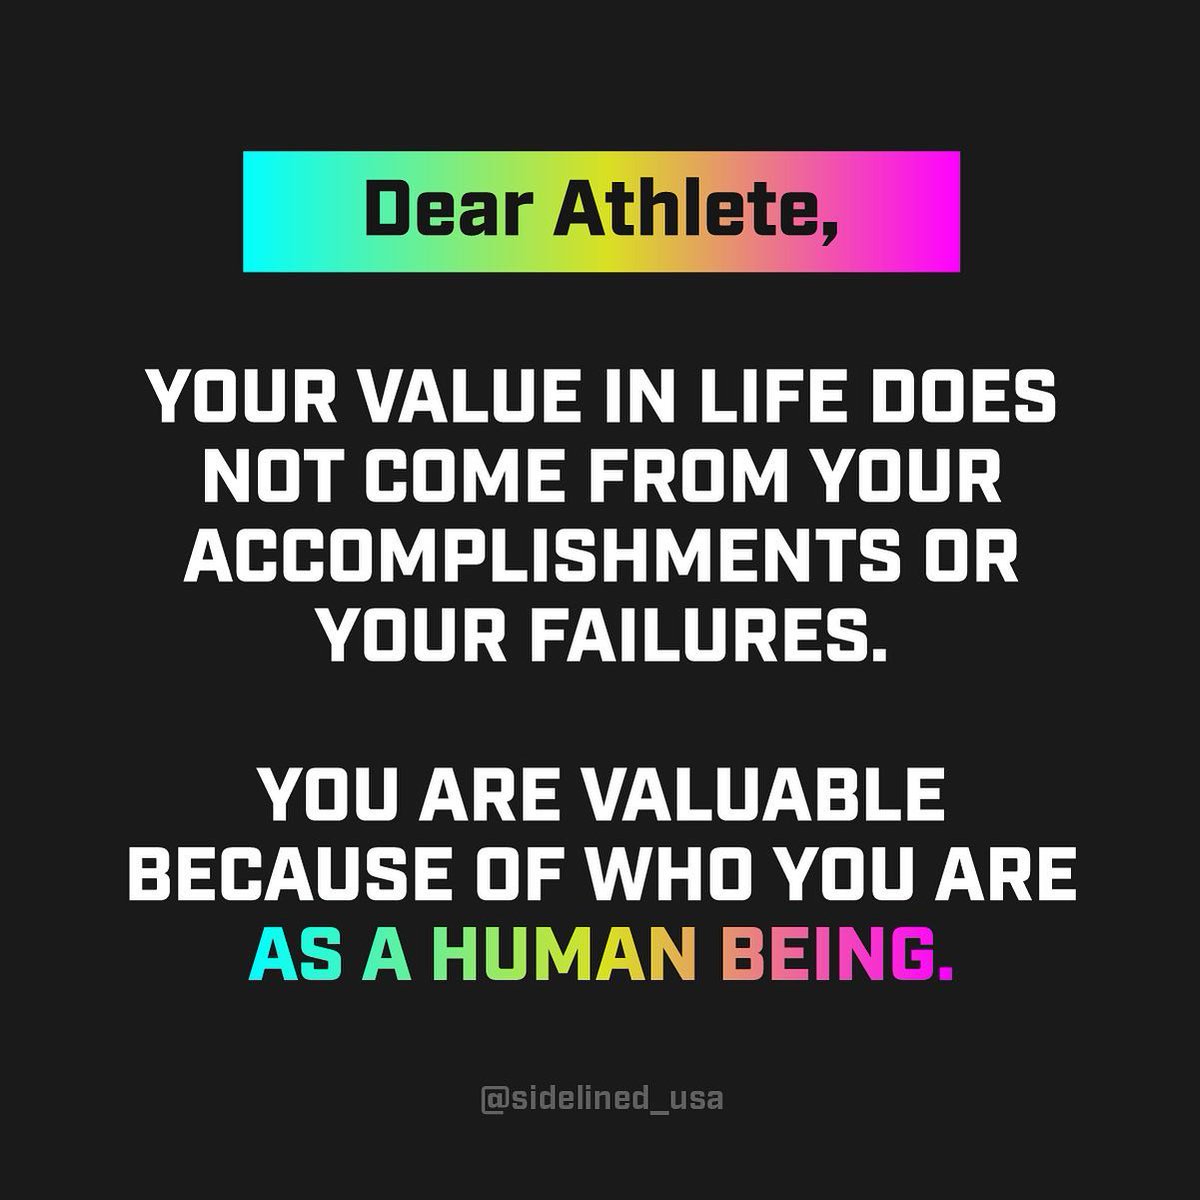 Don’t ever forget it 💙💚💛🧡❤️💜 
Send to someone who needs to hear this today 🙏
#retiredathlete #sidelined #athletementalhealth #morethananathlete